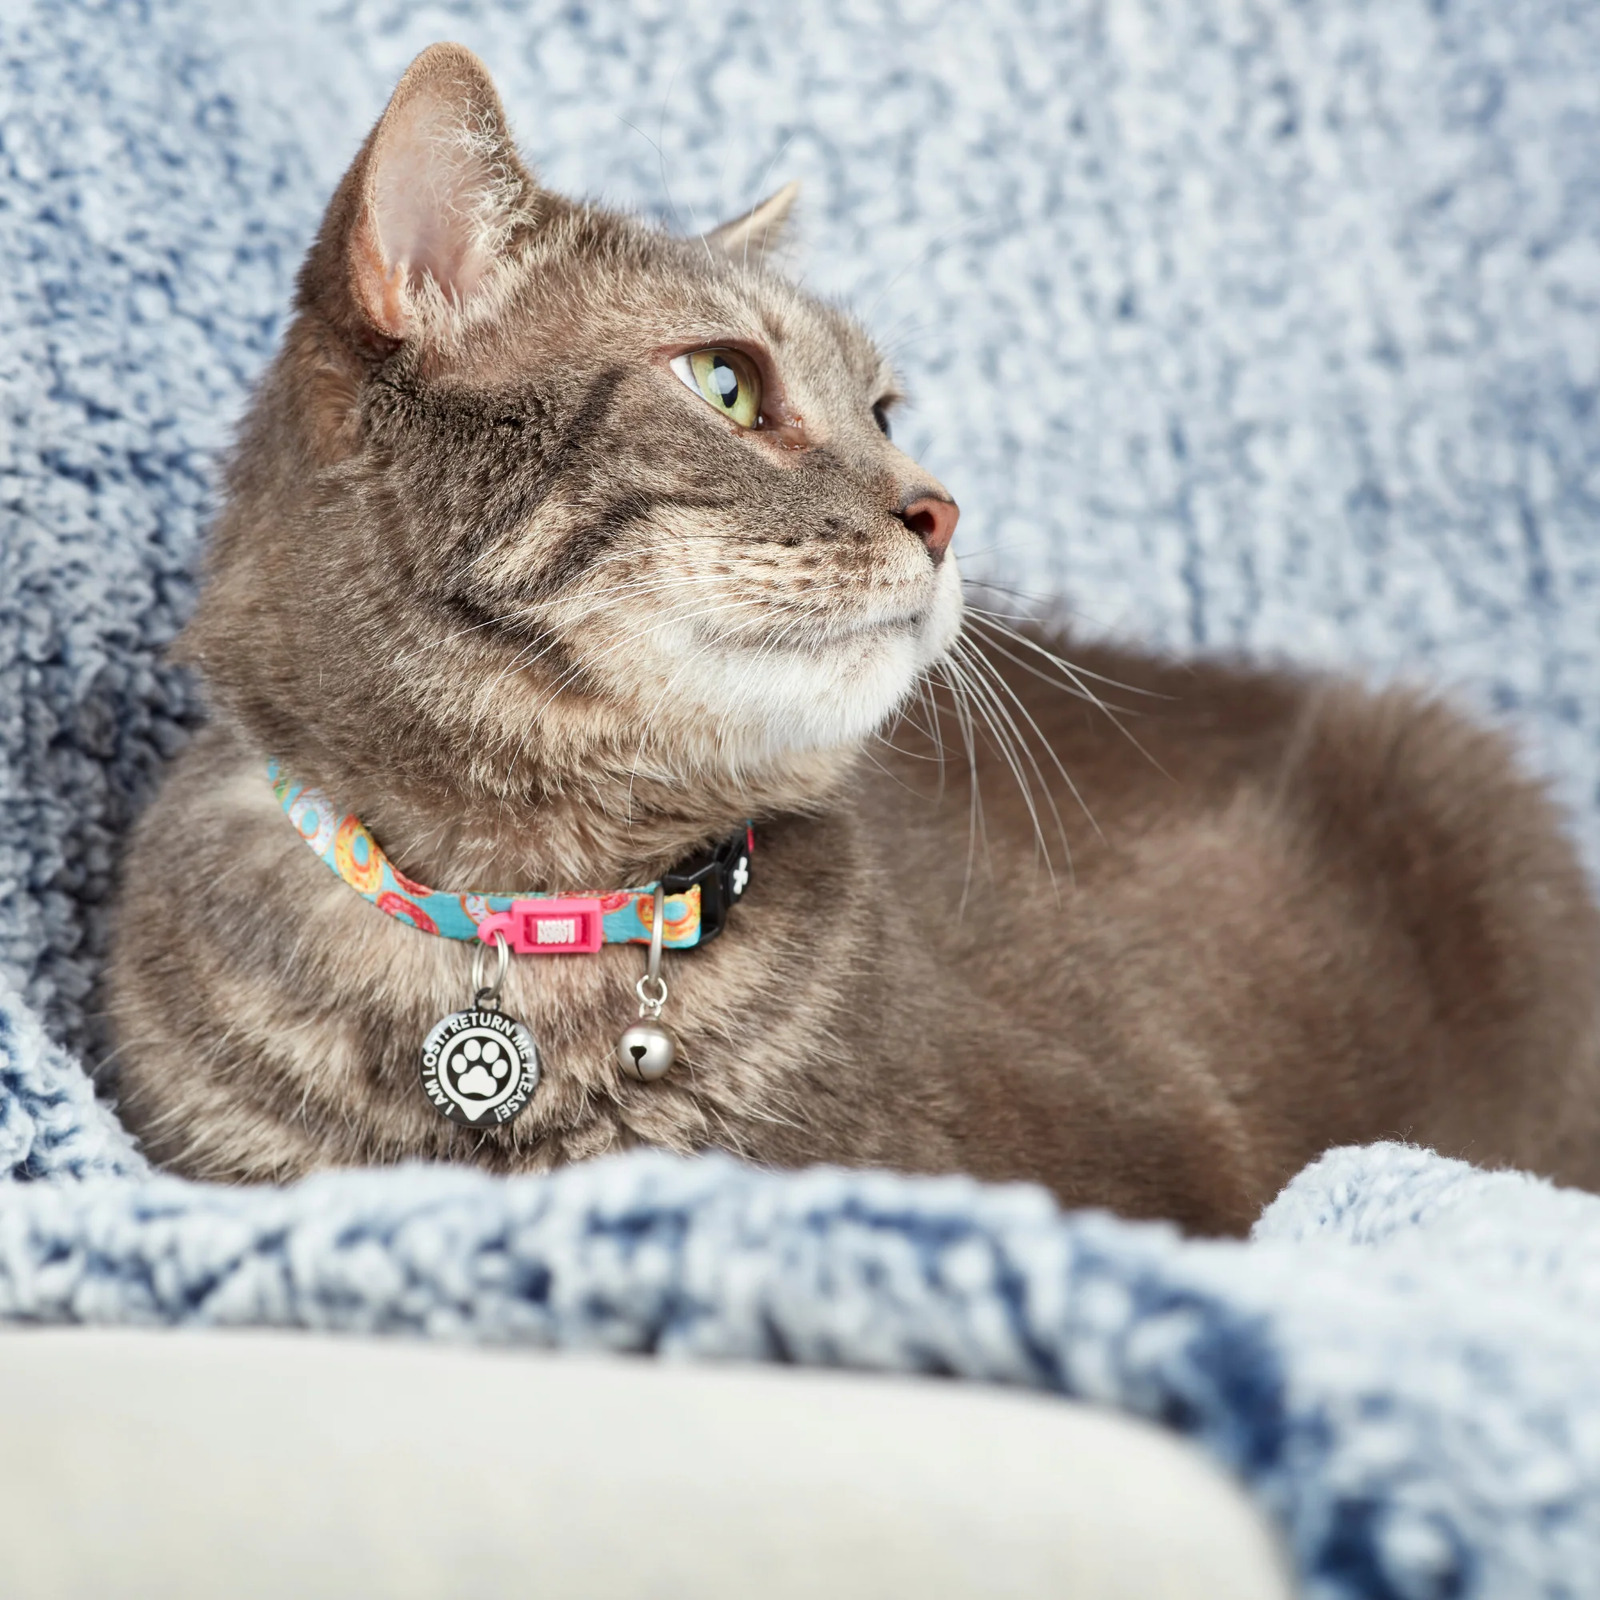 Max & Molly Smart ID Cat Collar - Donuts image 4